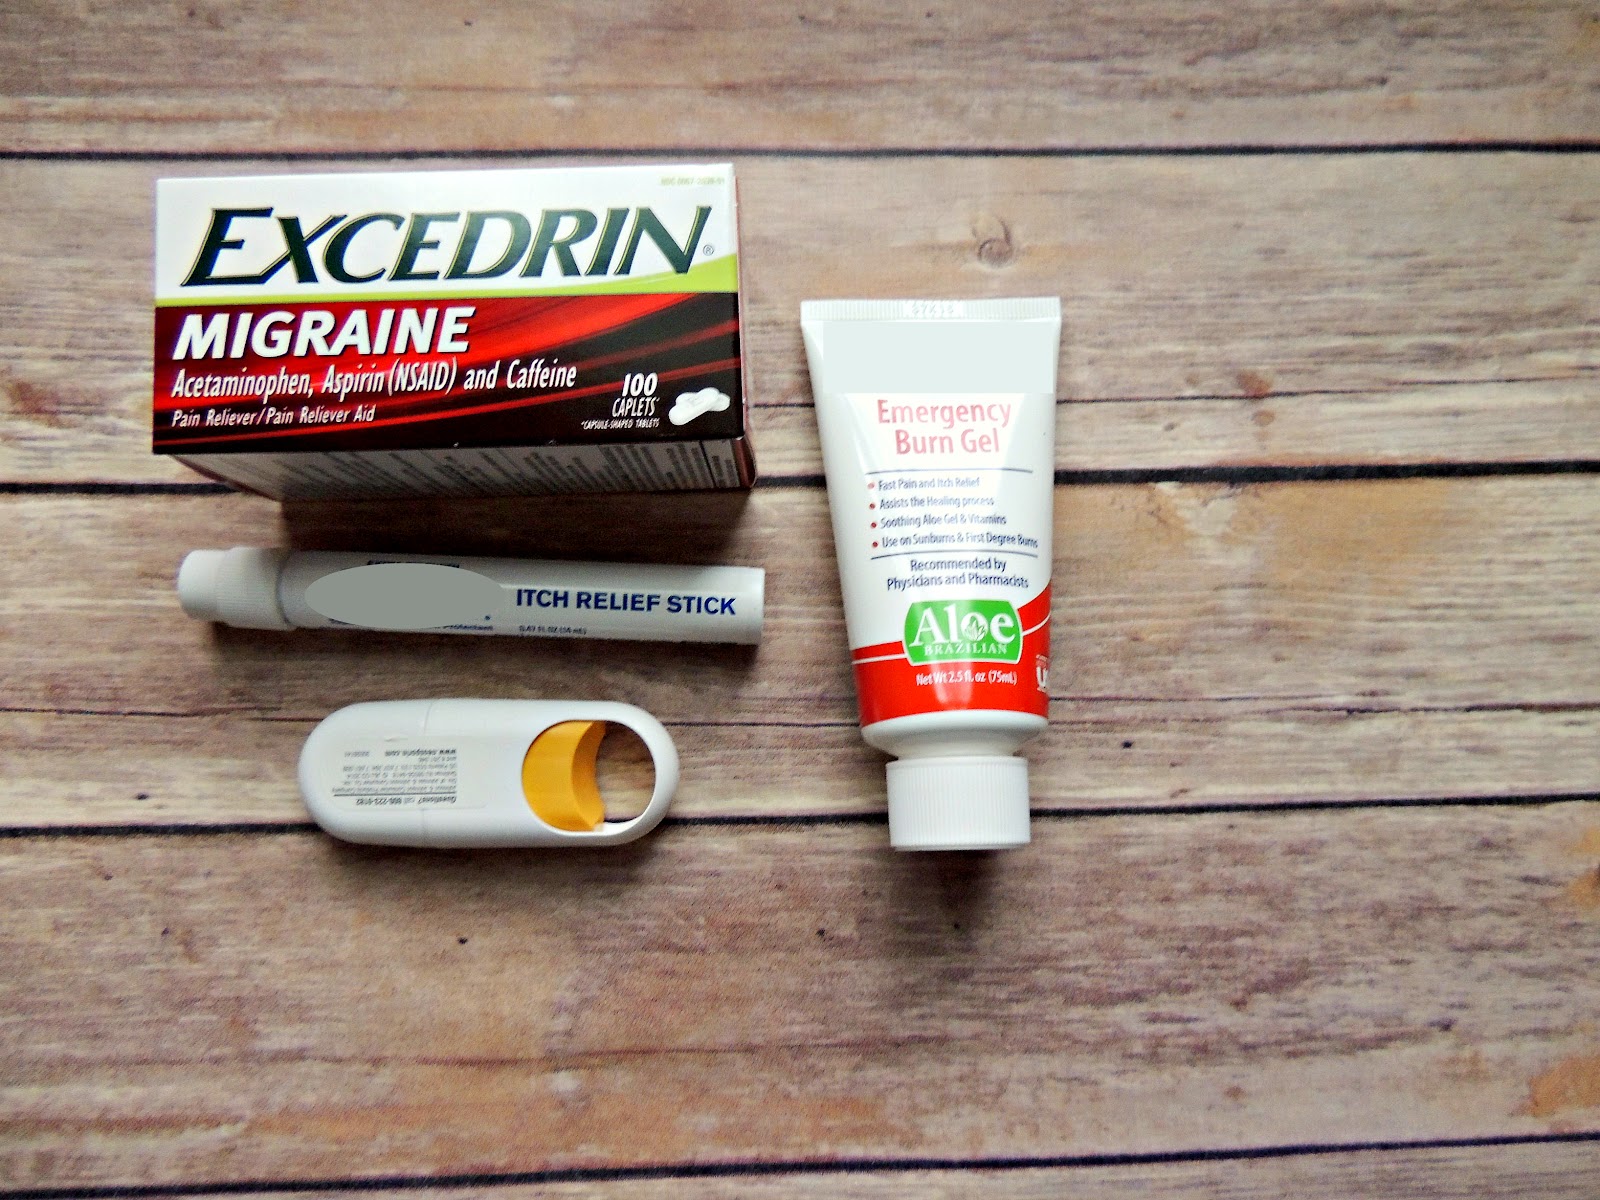 Excedrin® Migraine First Aid Kit for the Family #MoreMomentsWithExcedrin #CollectiveBias #ad Essentials.jpg